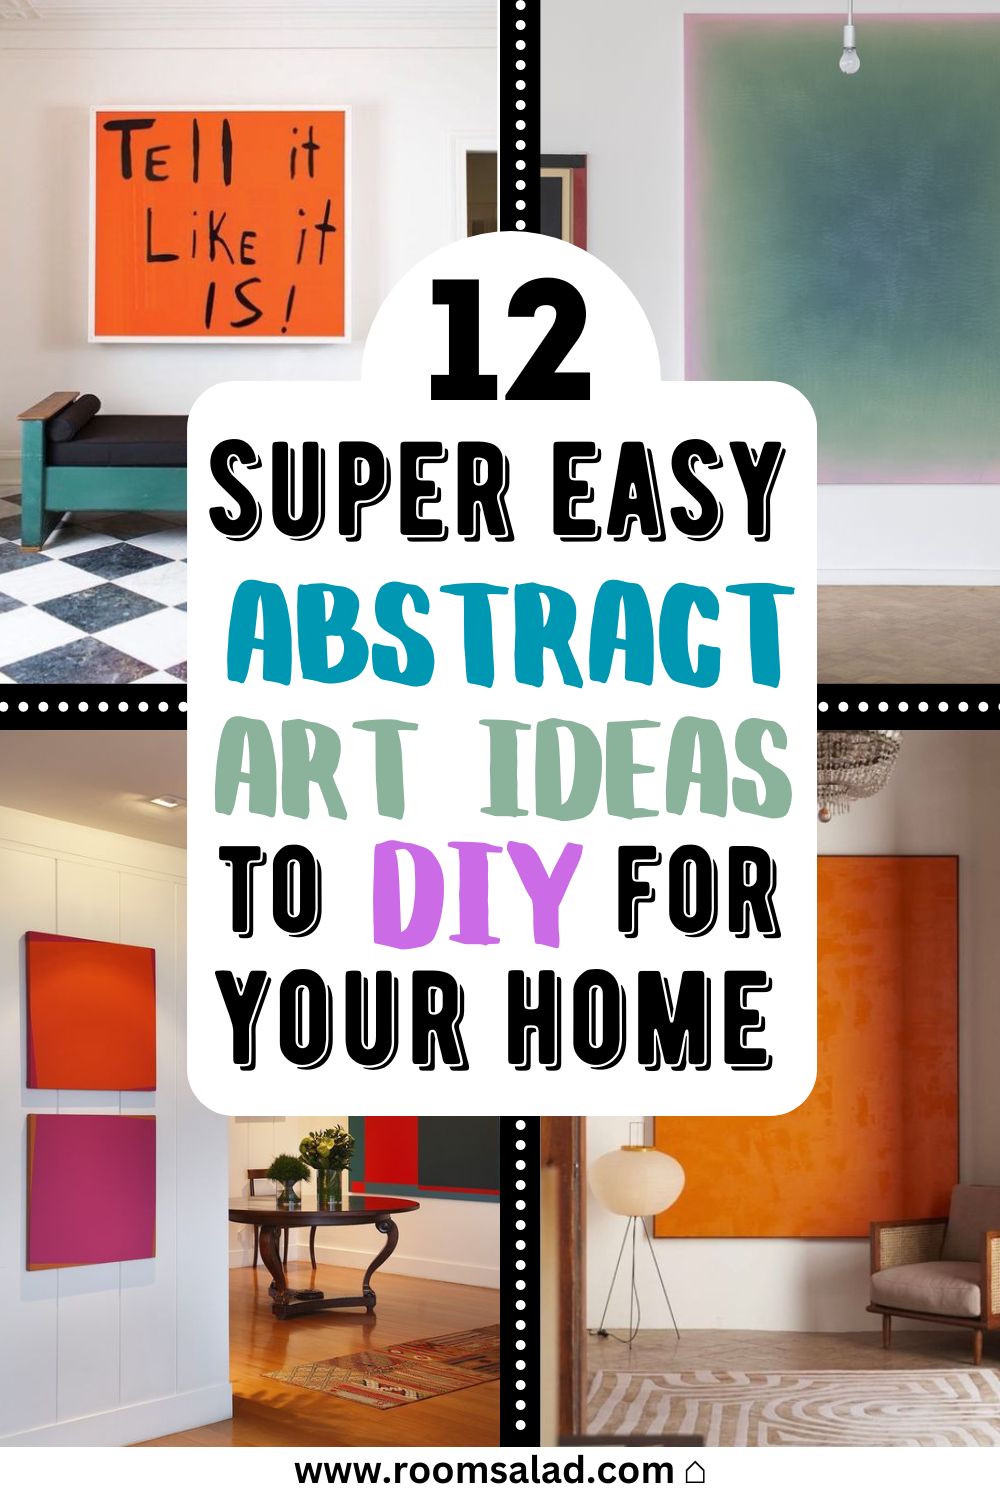 12 Easy Abstract Art Ideas to DIY for Airbnb Decor